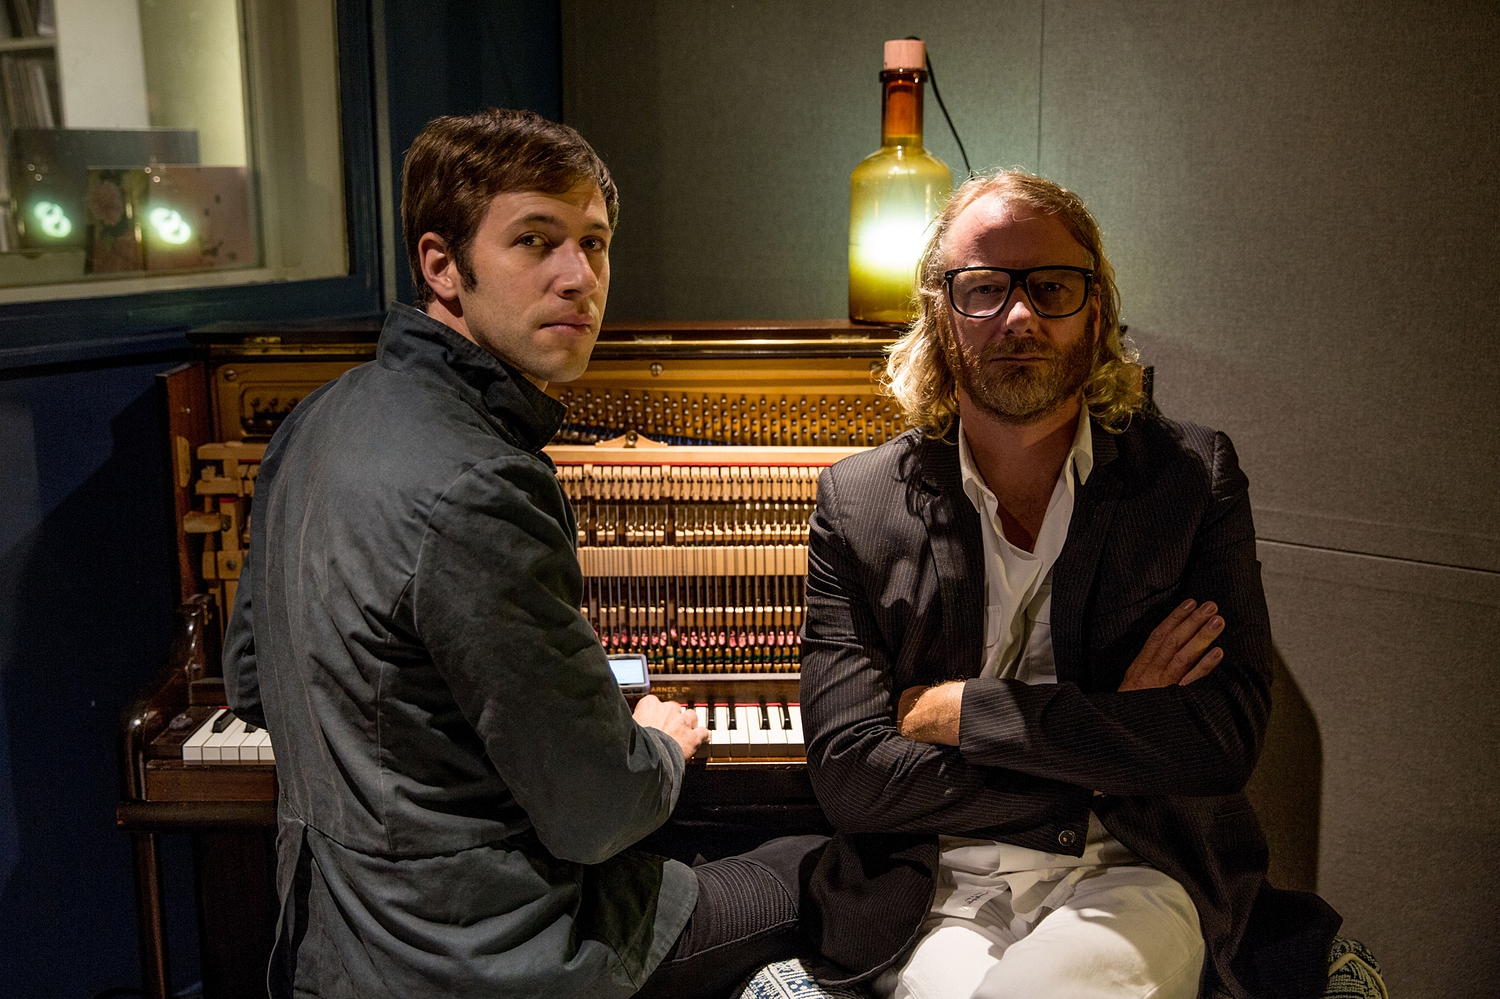 El Vy: "It’s an album of guilty pleasures without the guilt"